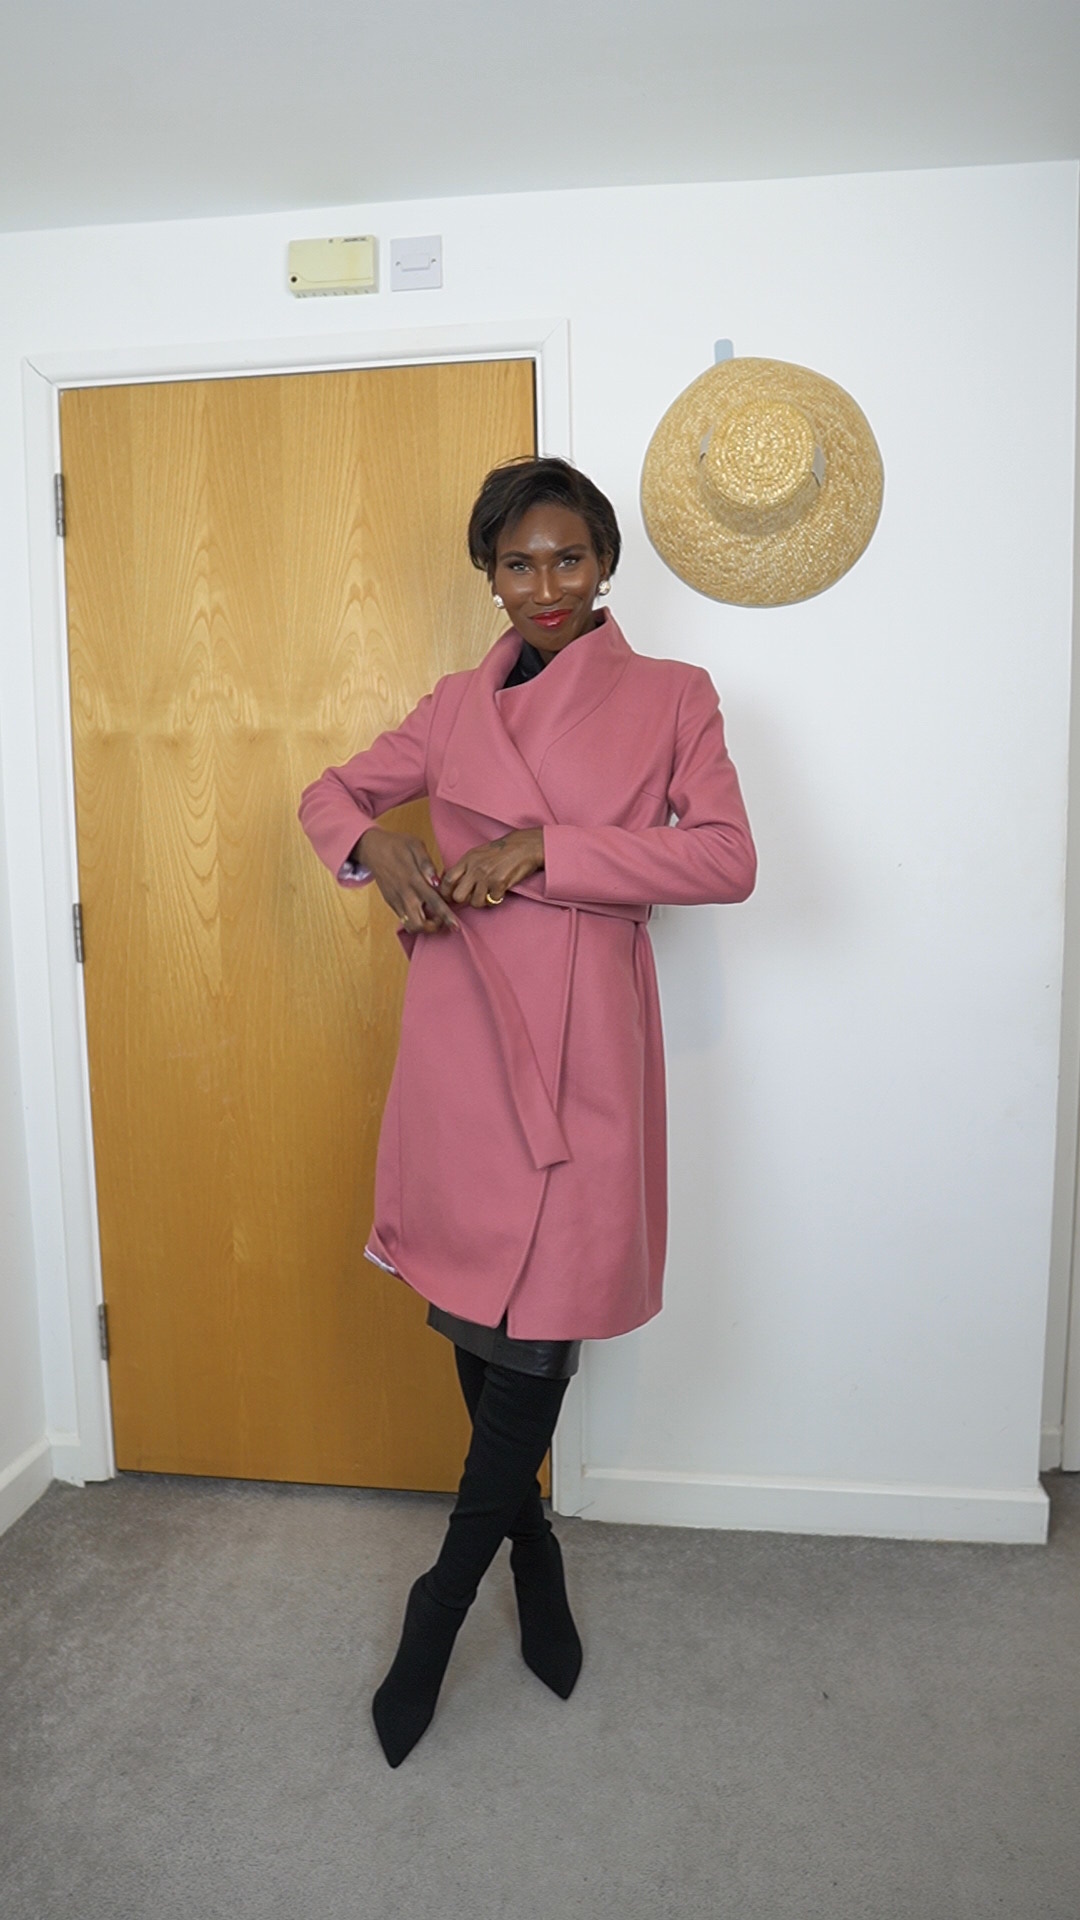 The Most Stylish coat - Ted Baker Coat Review
Thatcorporatechic